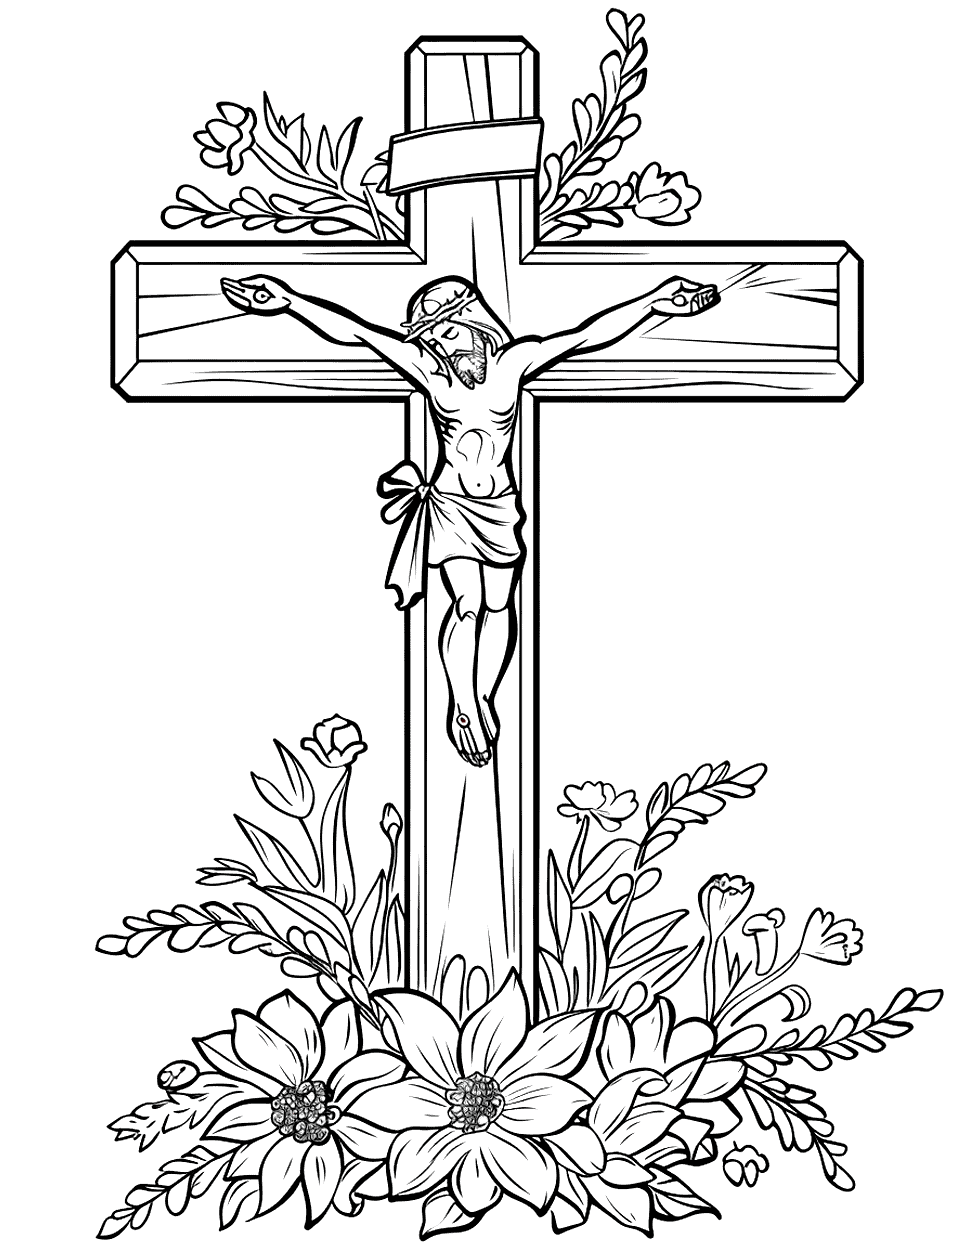 Crucifix with Floral Decor Cross Coloring Page - A crucifix adorned with a garland of flowers at its base.